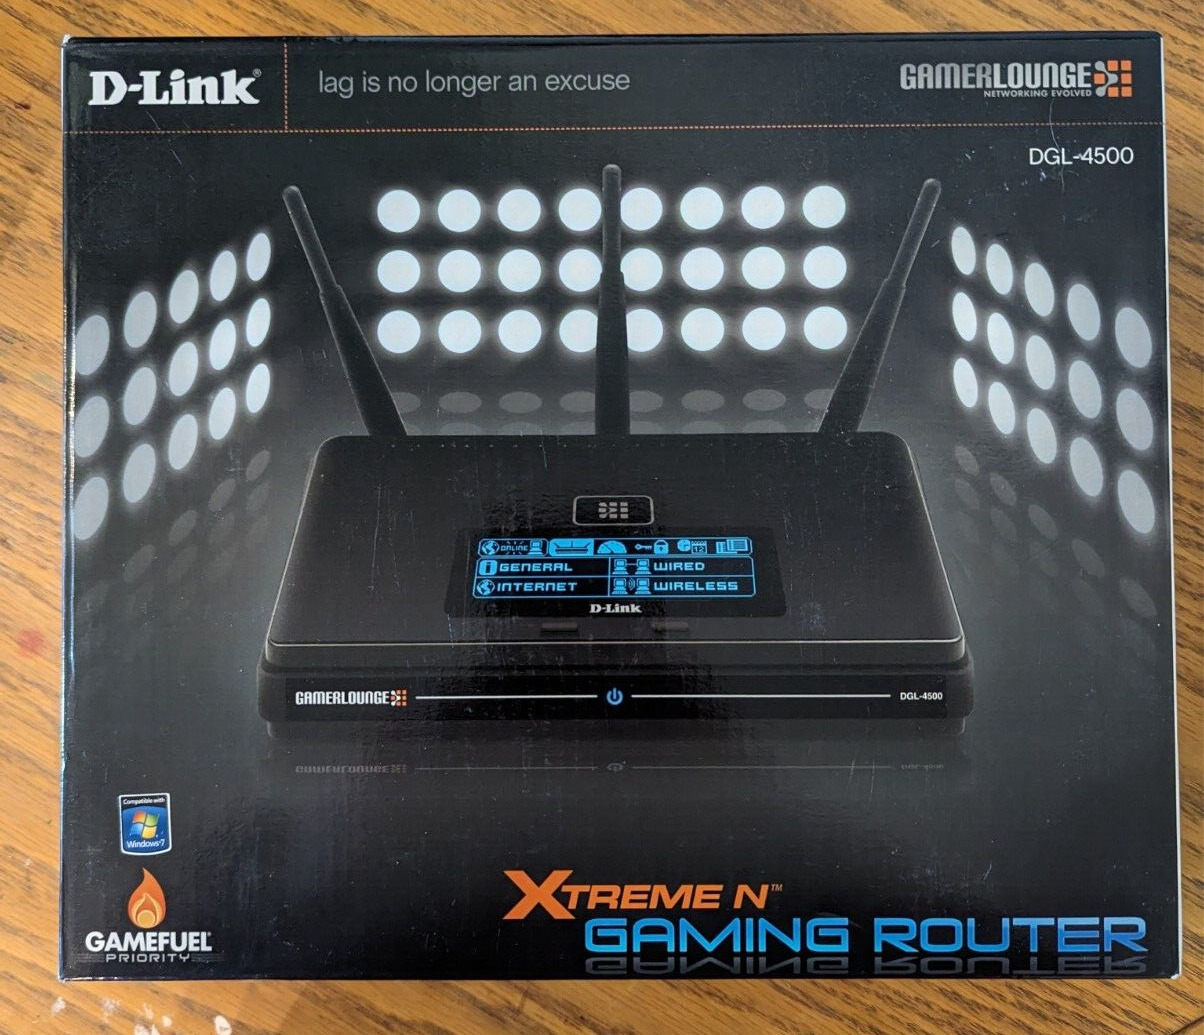 D-Link DGL-4500 XTreme N Gaming Router